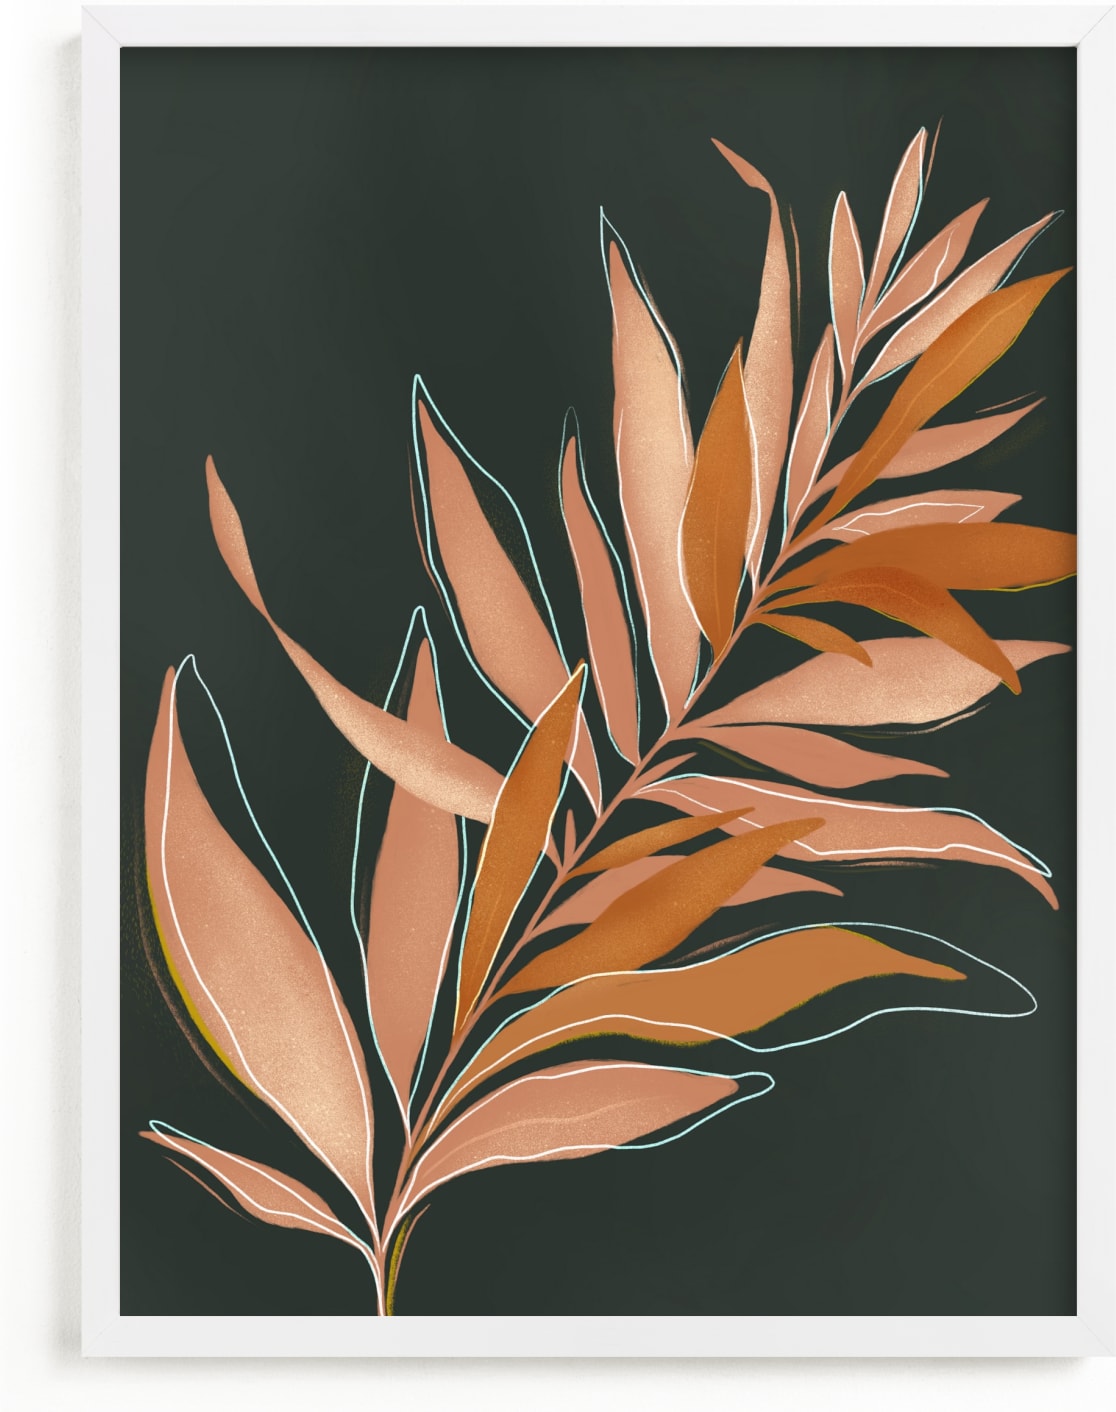 This is a brown art by Julie Murray called Falling Fern.